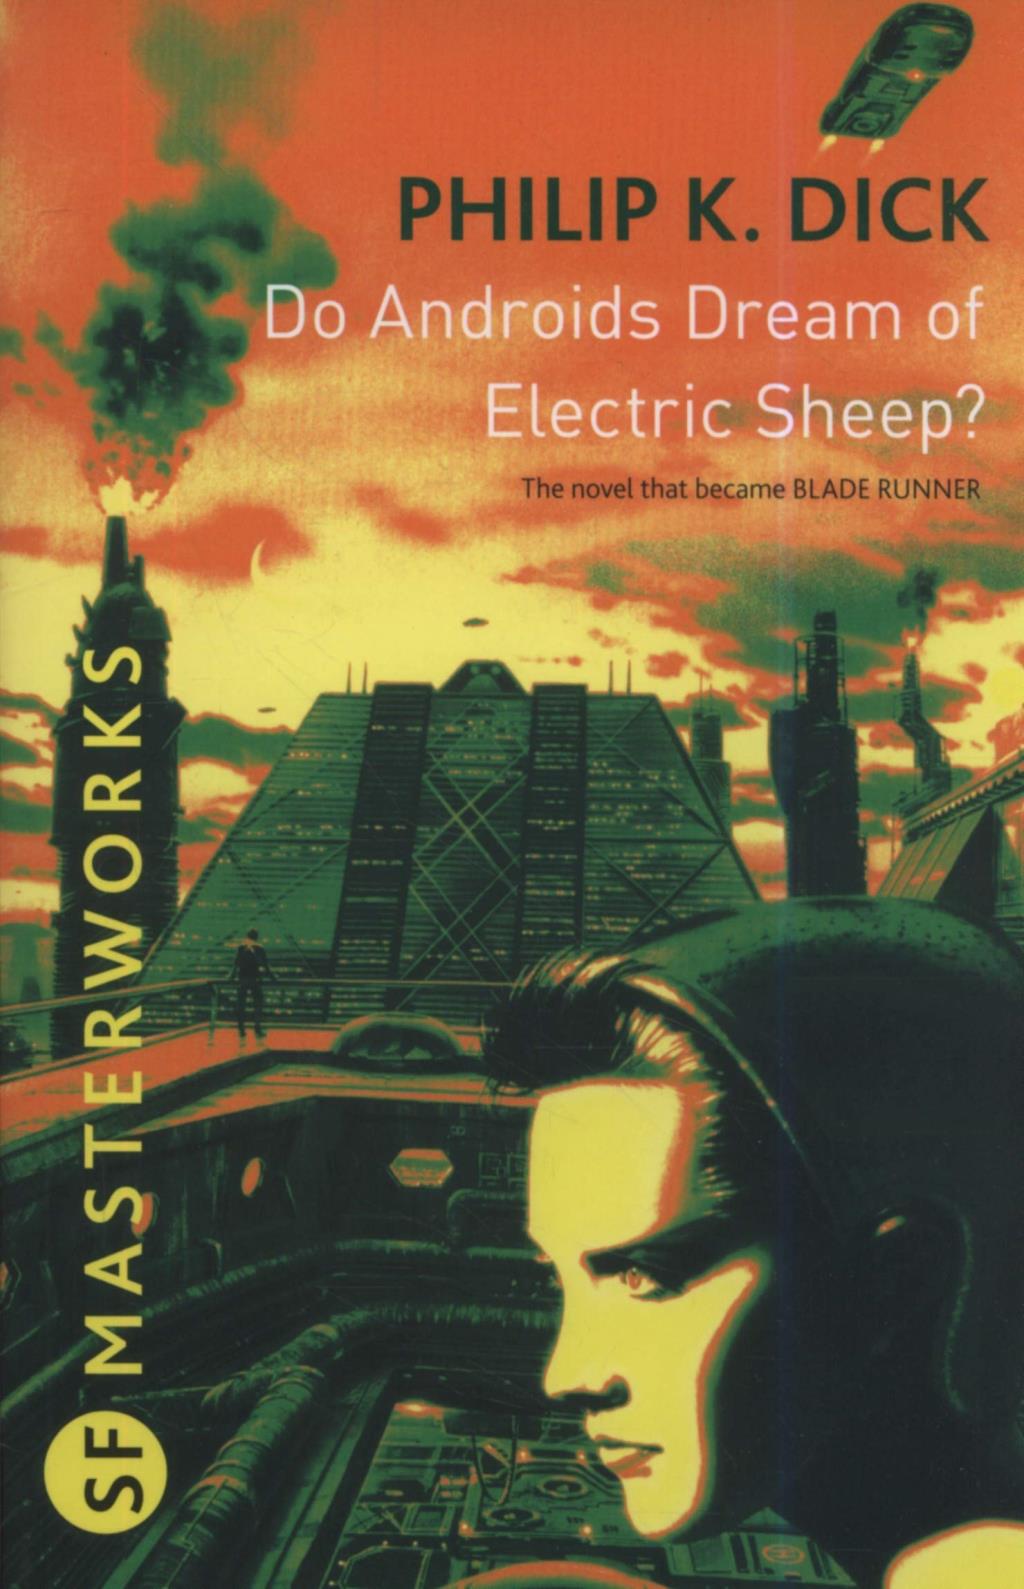 do androids dream of electric sheep book cover